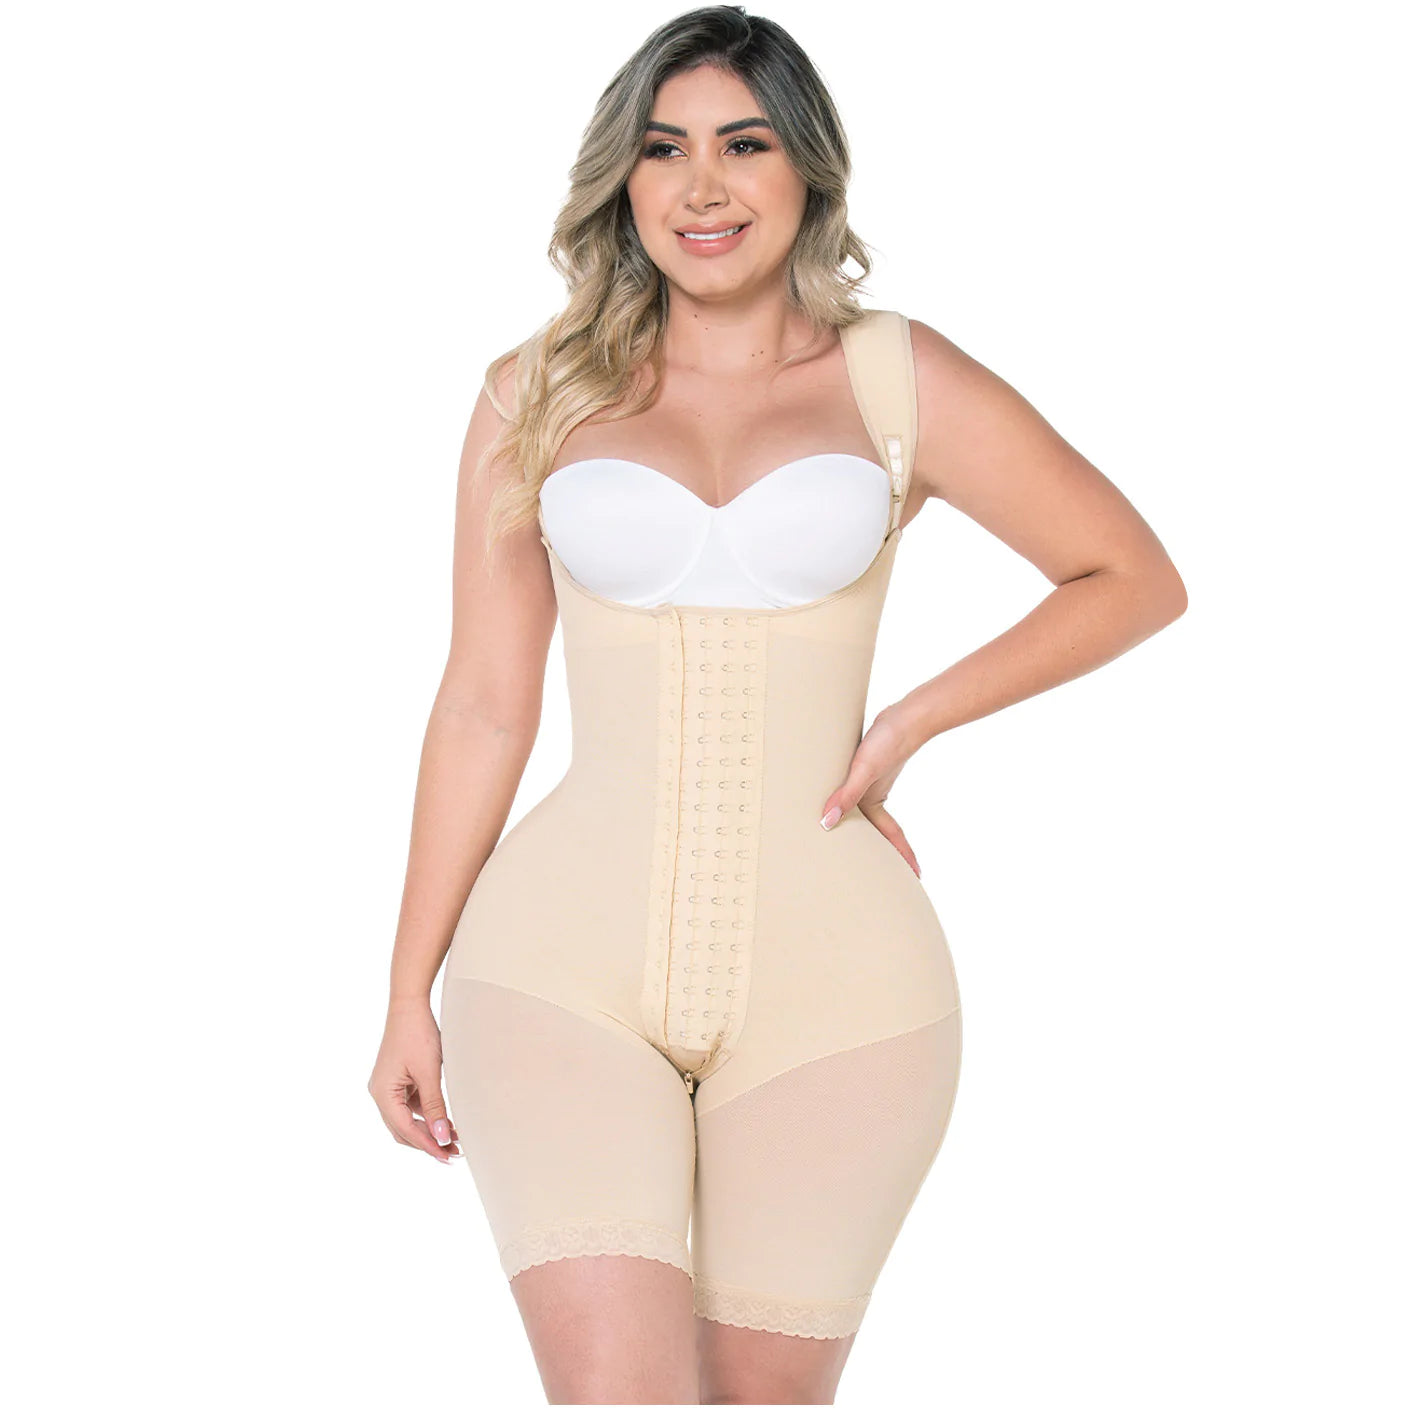 Colombian bbl girdle shorts with bra, small waist, wide hips | Guitar  Curves 